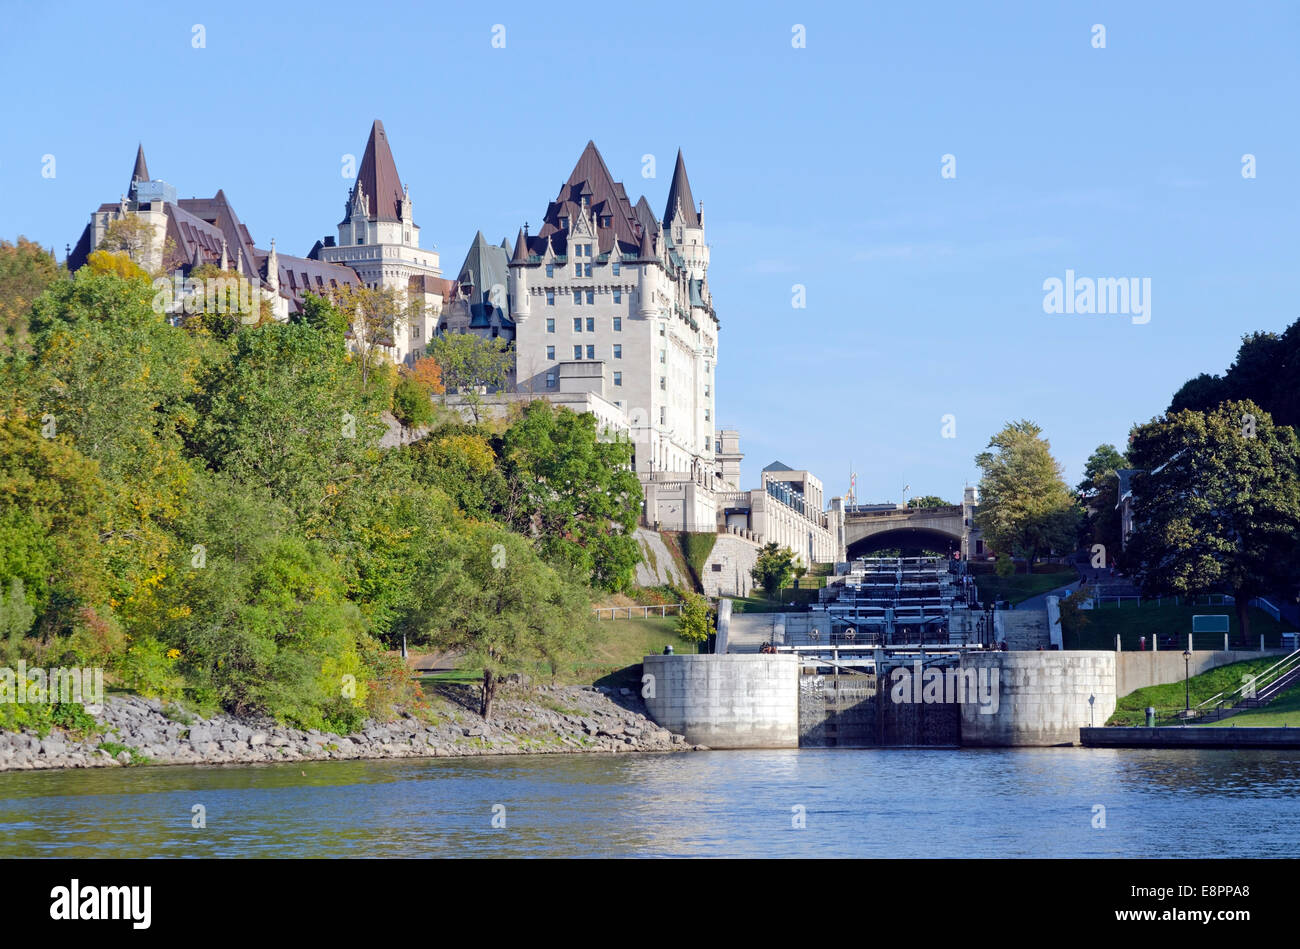 Fairmont Chateau Laurier and Rideau canal locks, Ontario, Canada Stock Photo